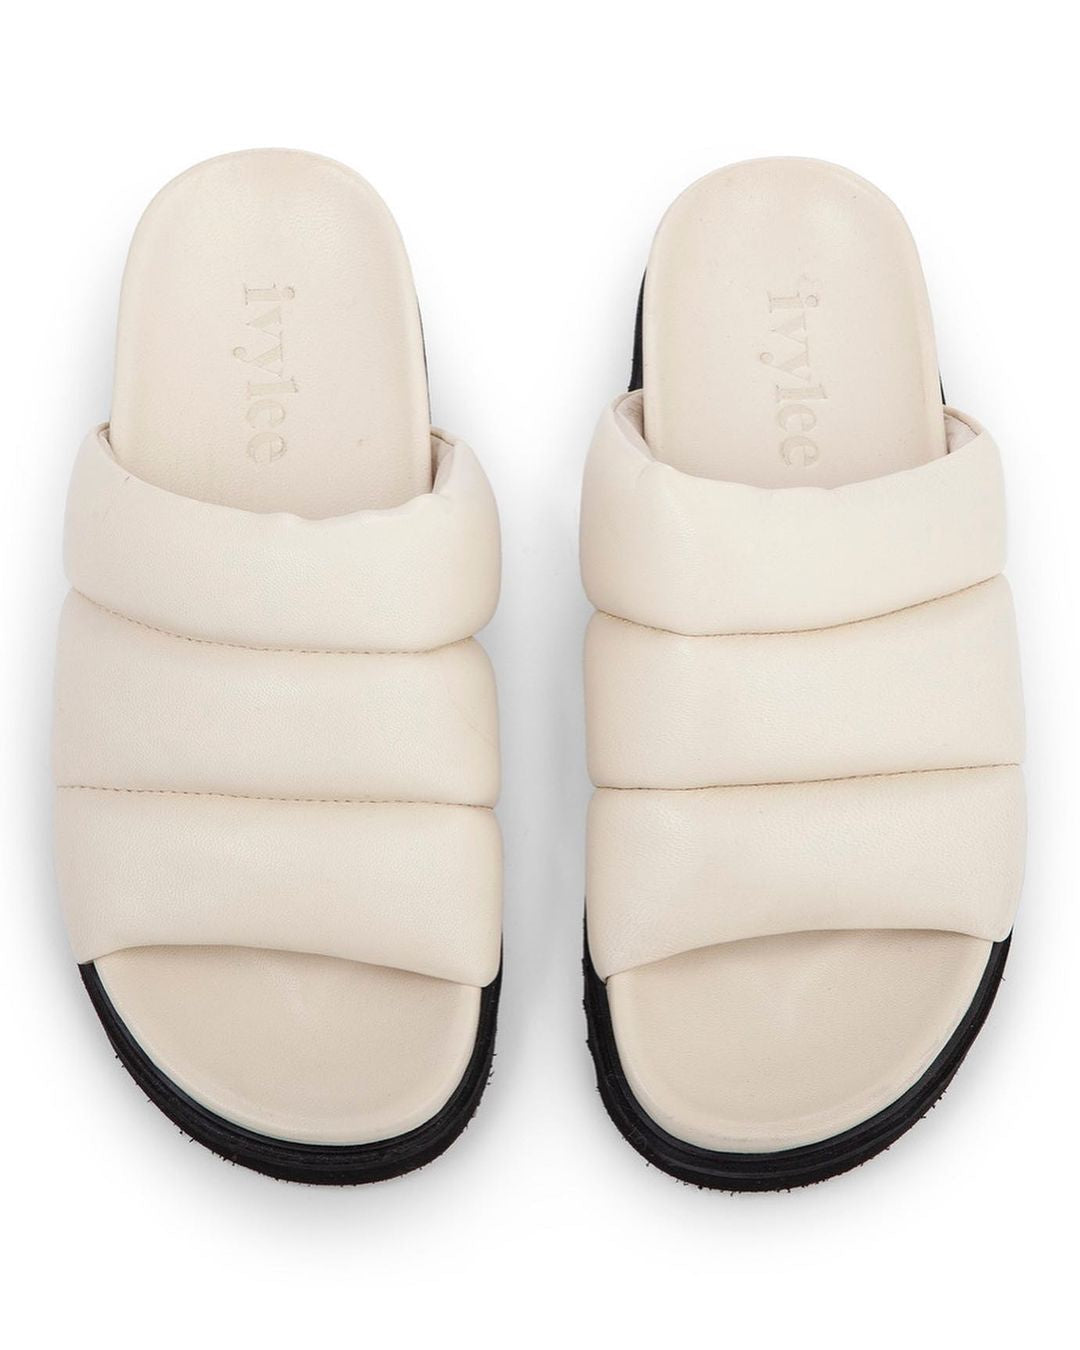 Marley Off White Leather Puffy Sandals 22-021-011 - OFF - 4